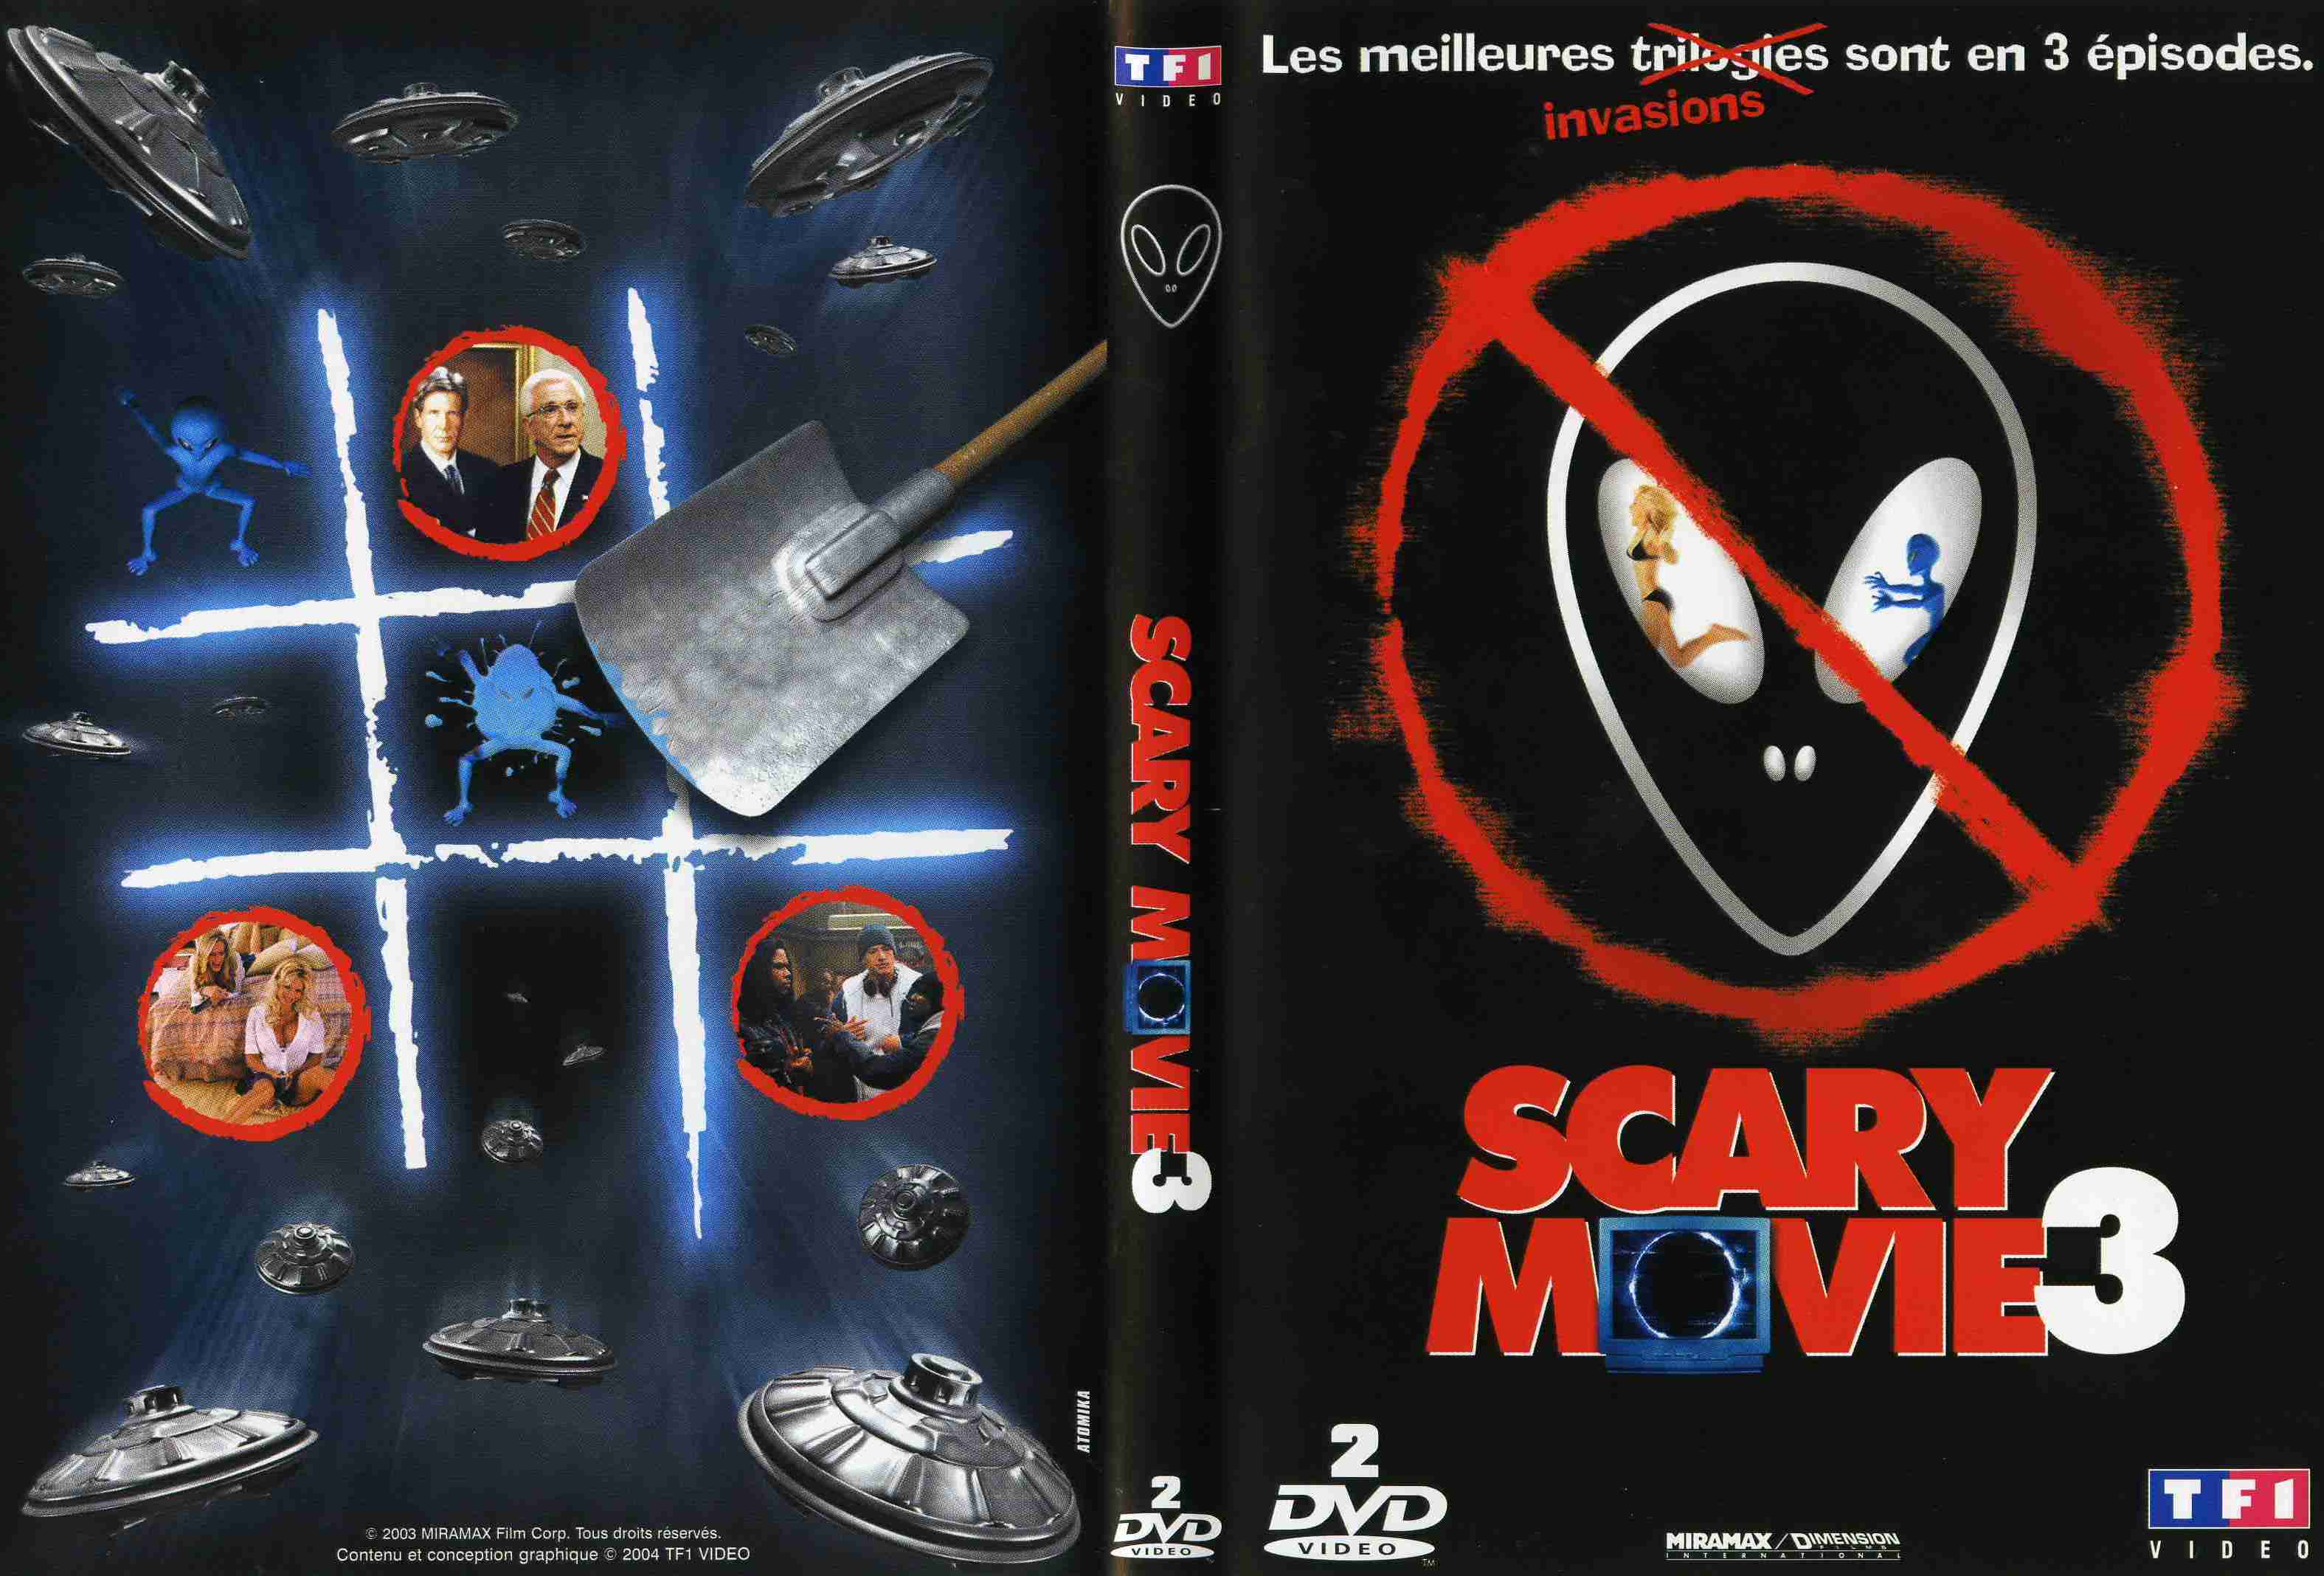 Jaquette DVD Scary movie 3 v2